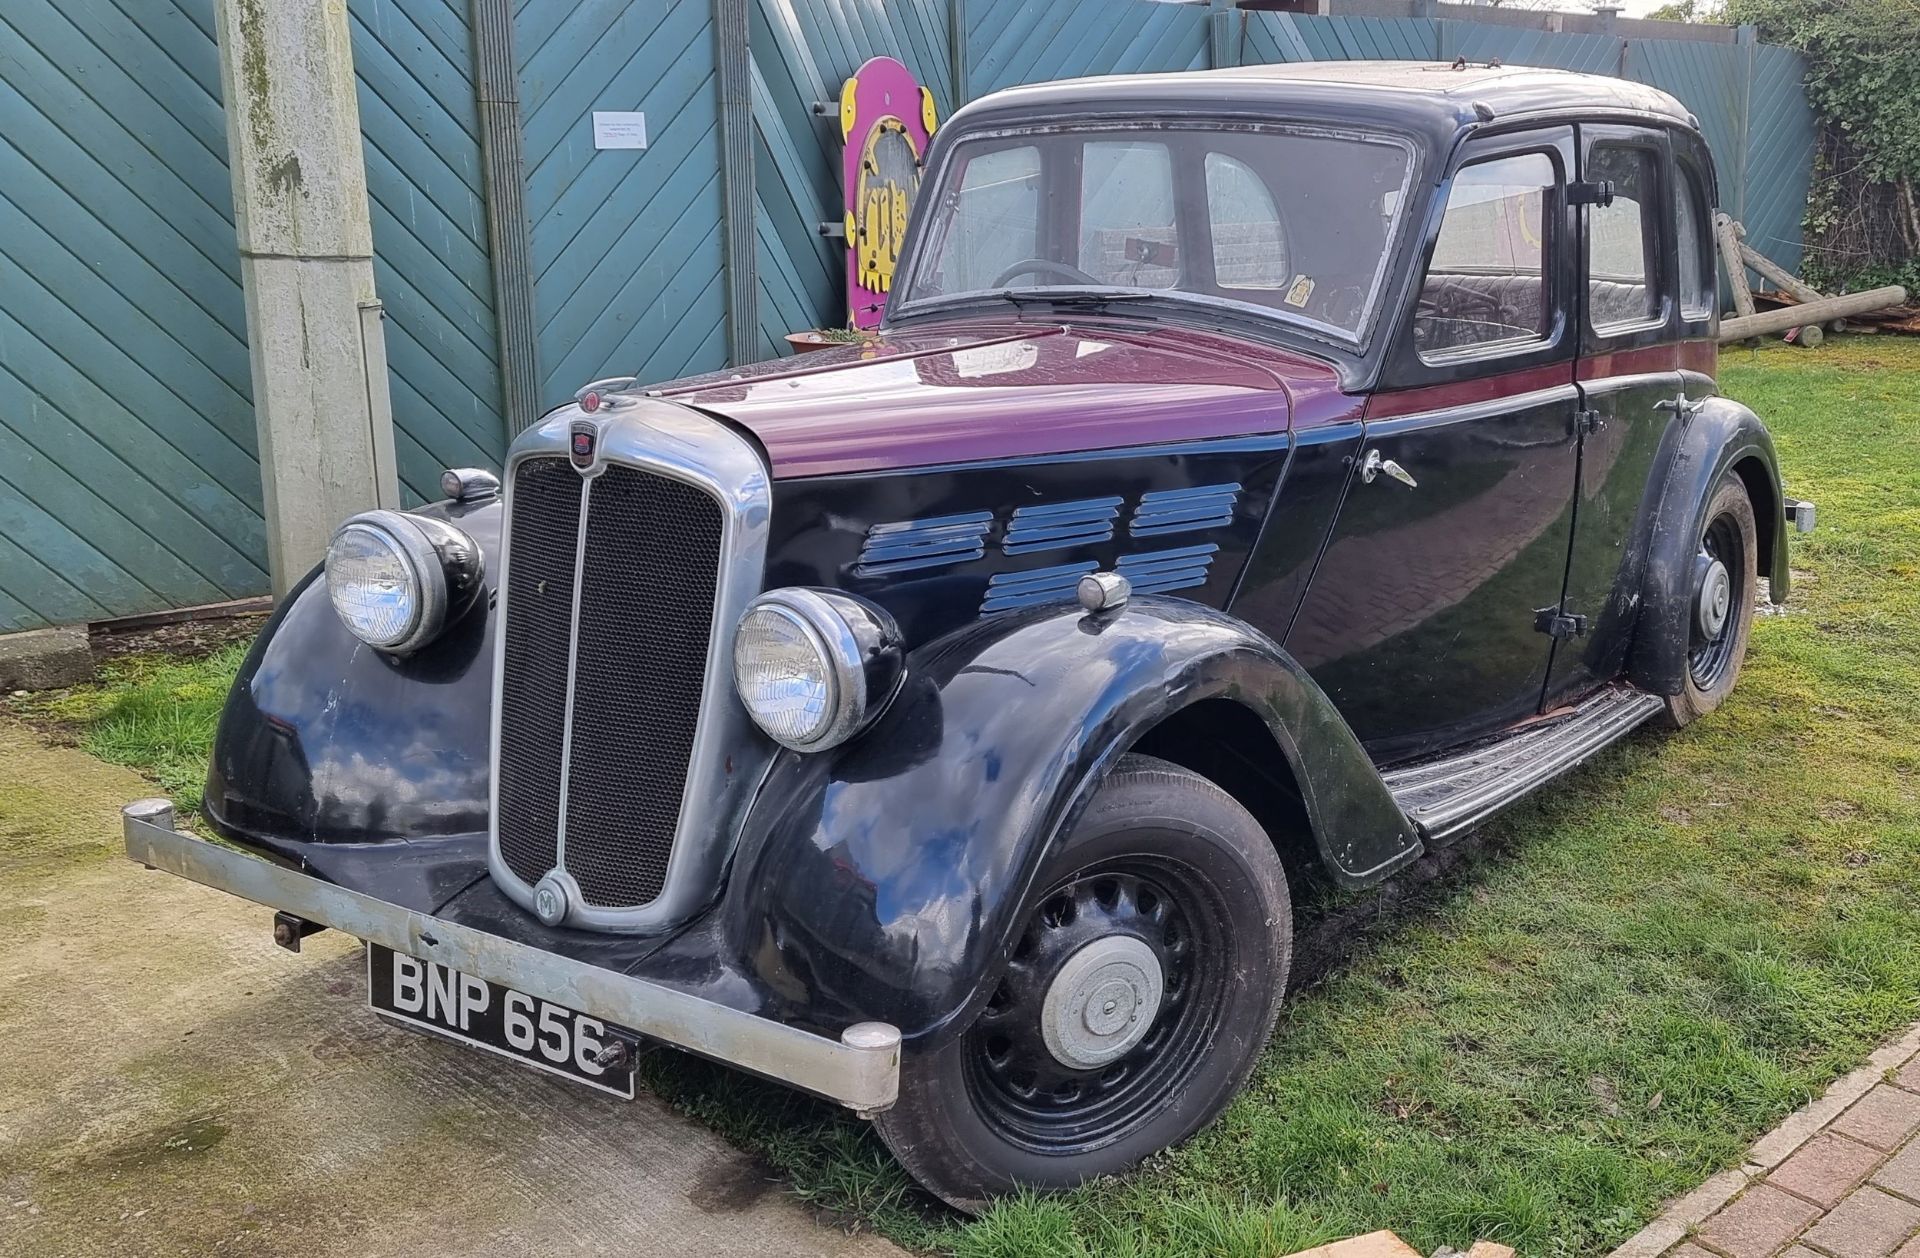 1937 Morris ten-Four, 1292cc. Registration number BNP 656 (see text). Chassis number unknown. Engine - Image 2 of 17